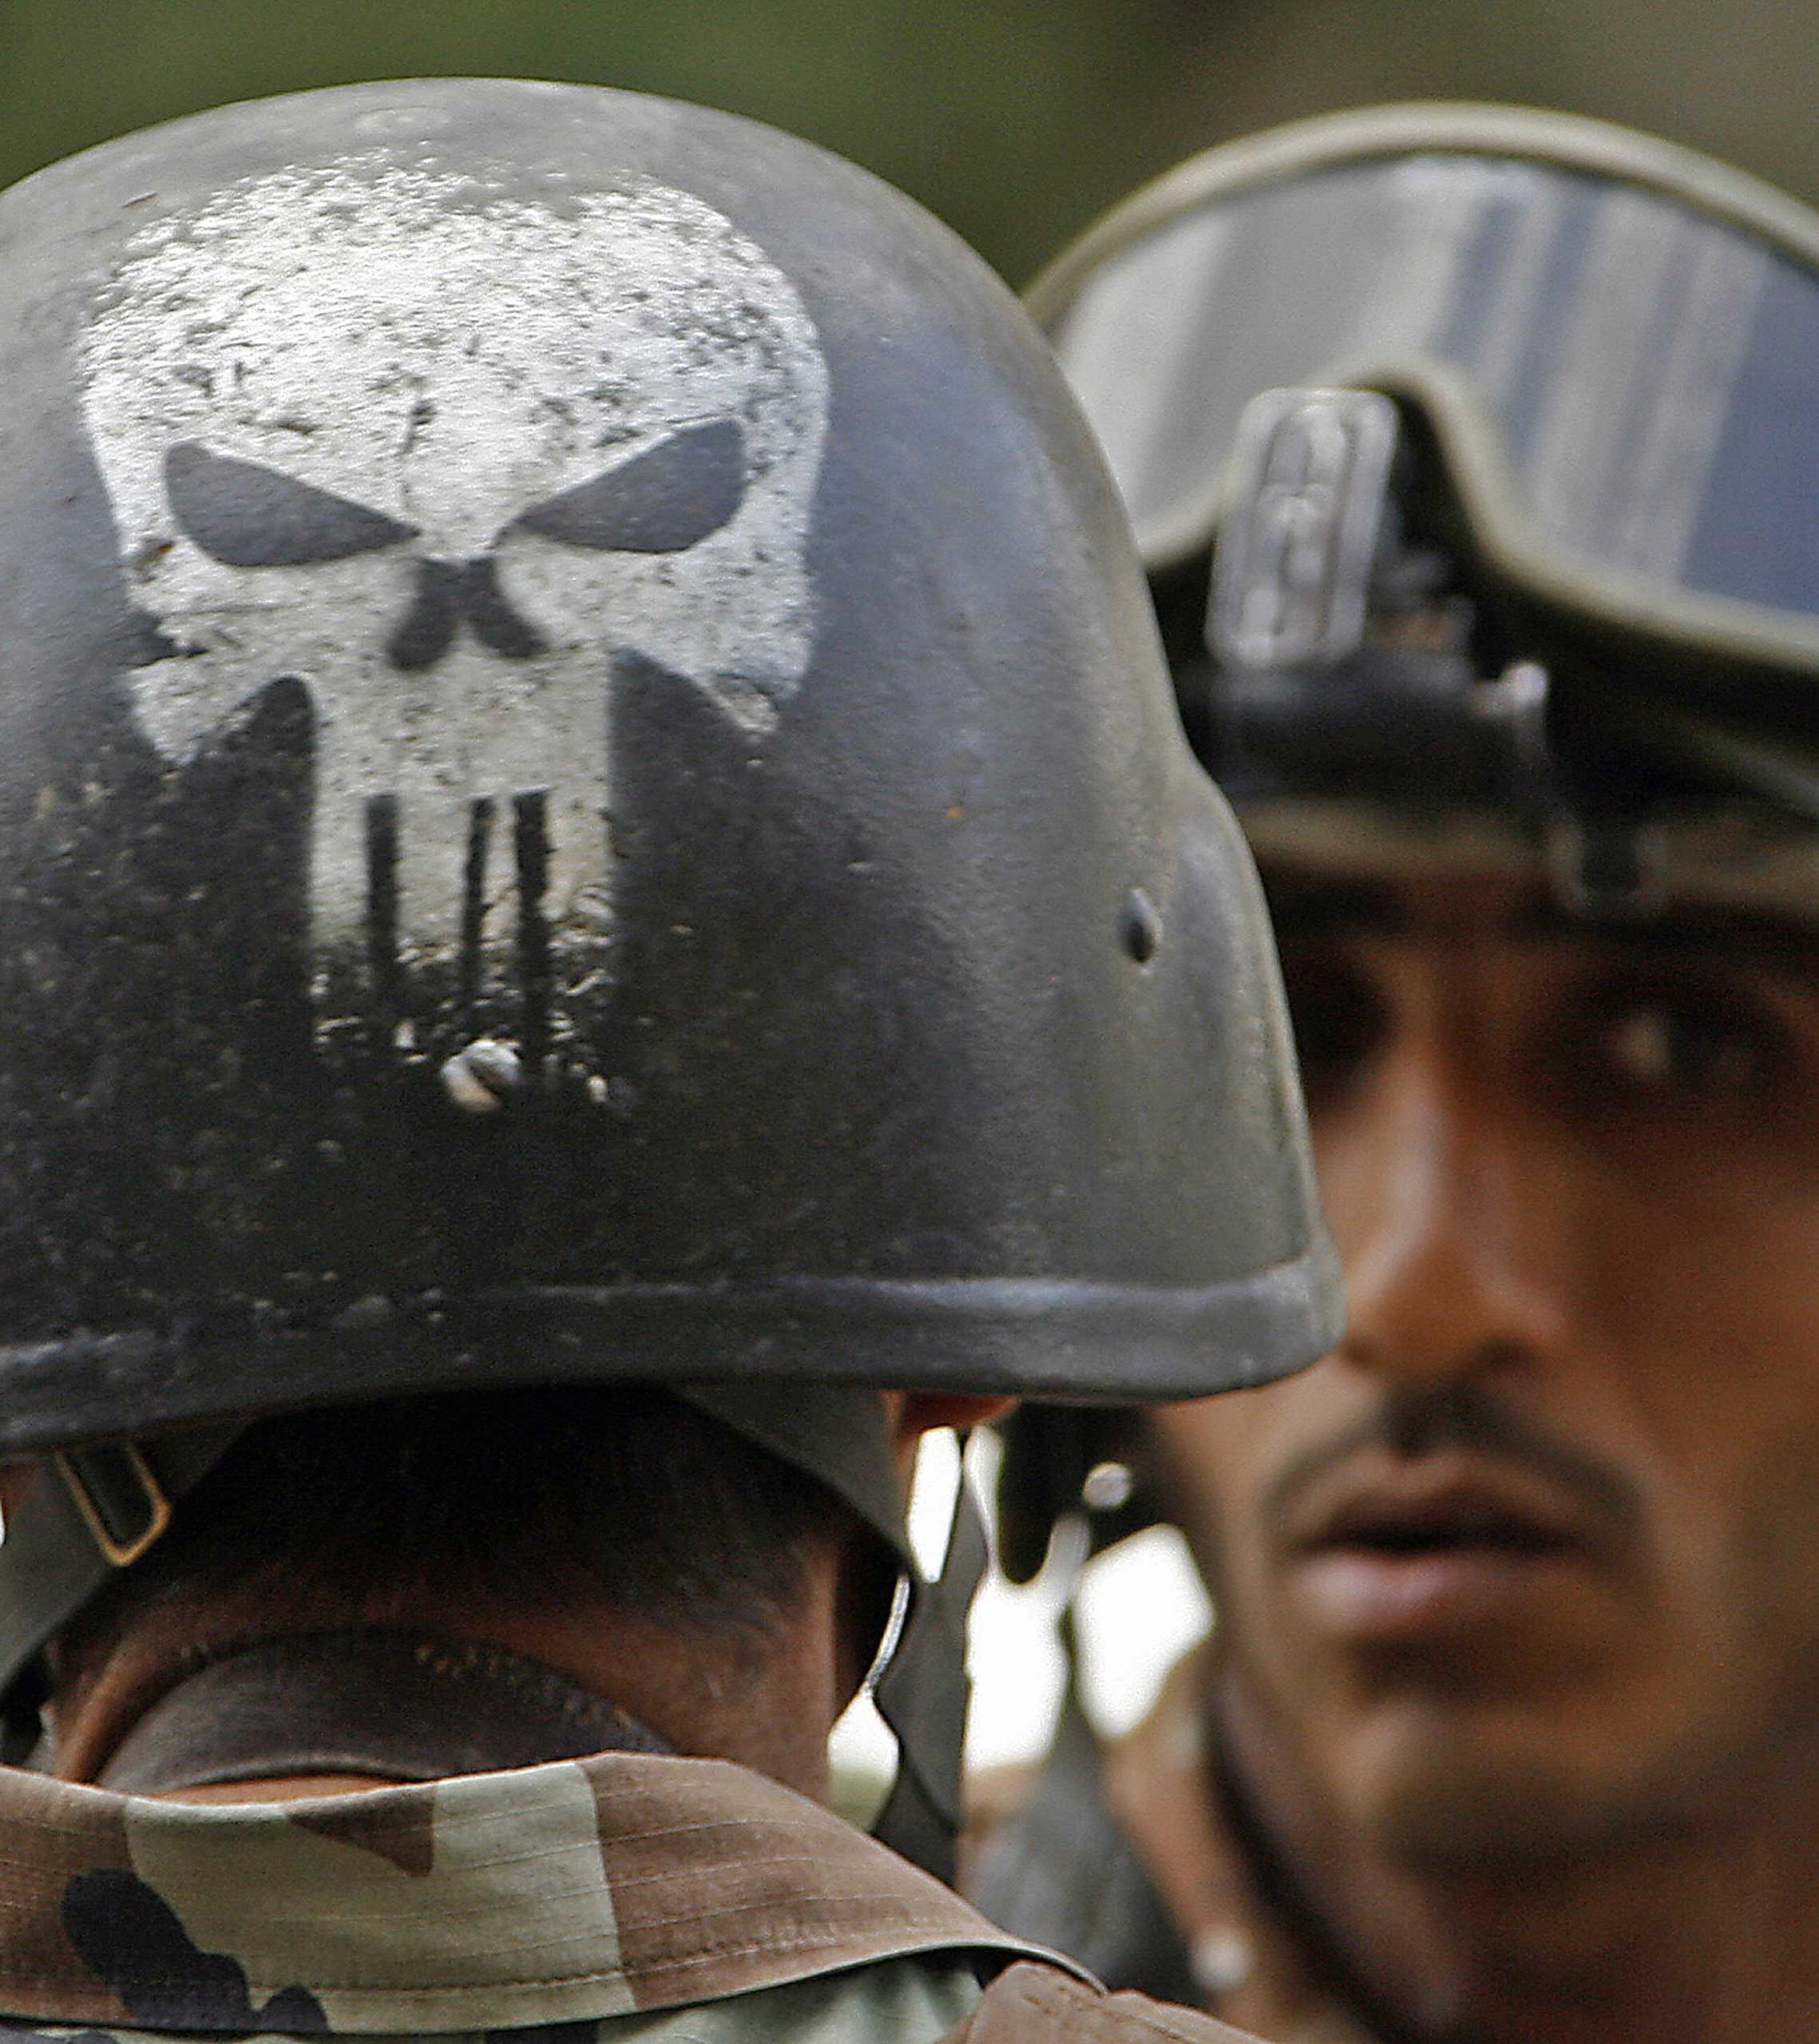 The Punisher skull logo  seen painted on the helmet of an Iraqi army soldier patrolling in Baghdad in 2007. (Patrick Baz—AFP/Getty Images)